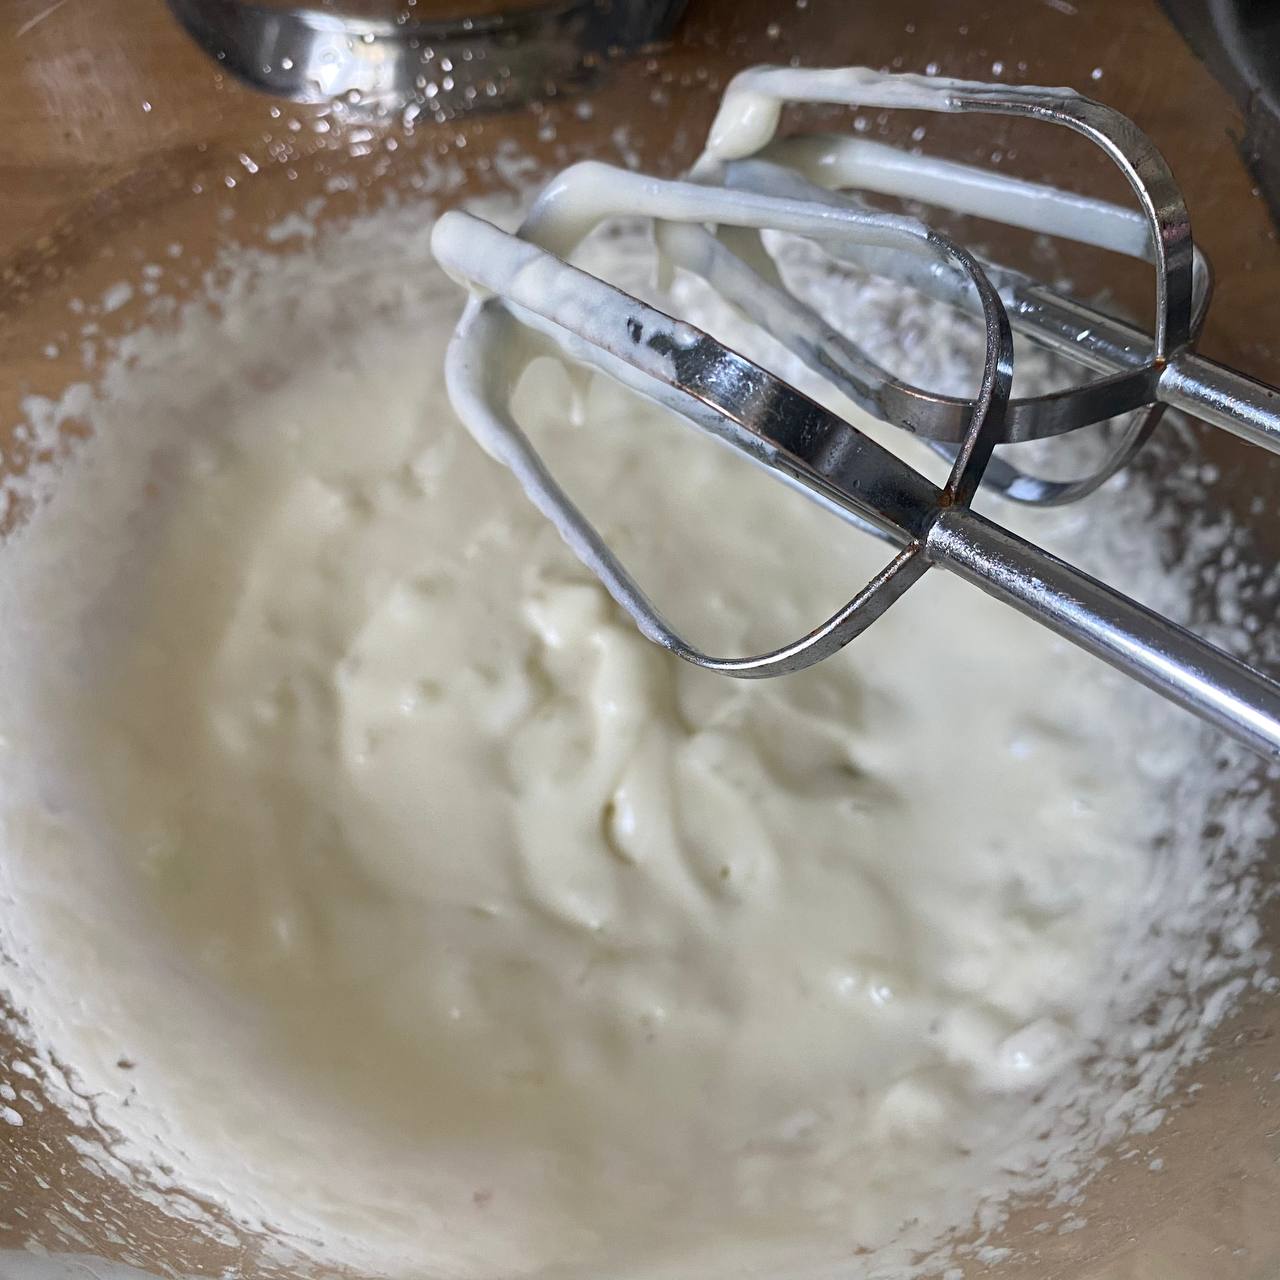 Consistency after whisking together